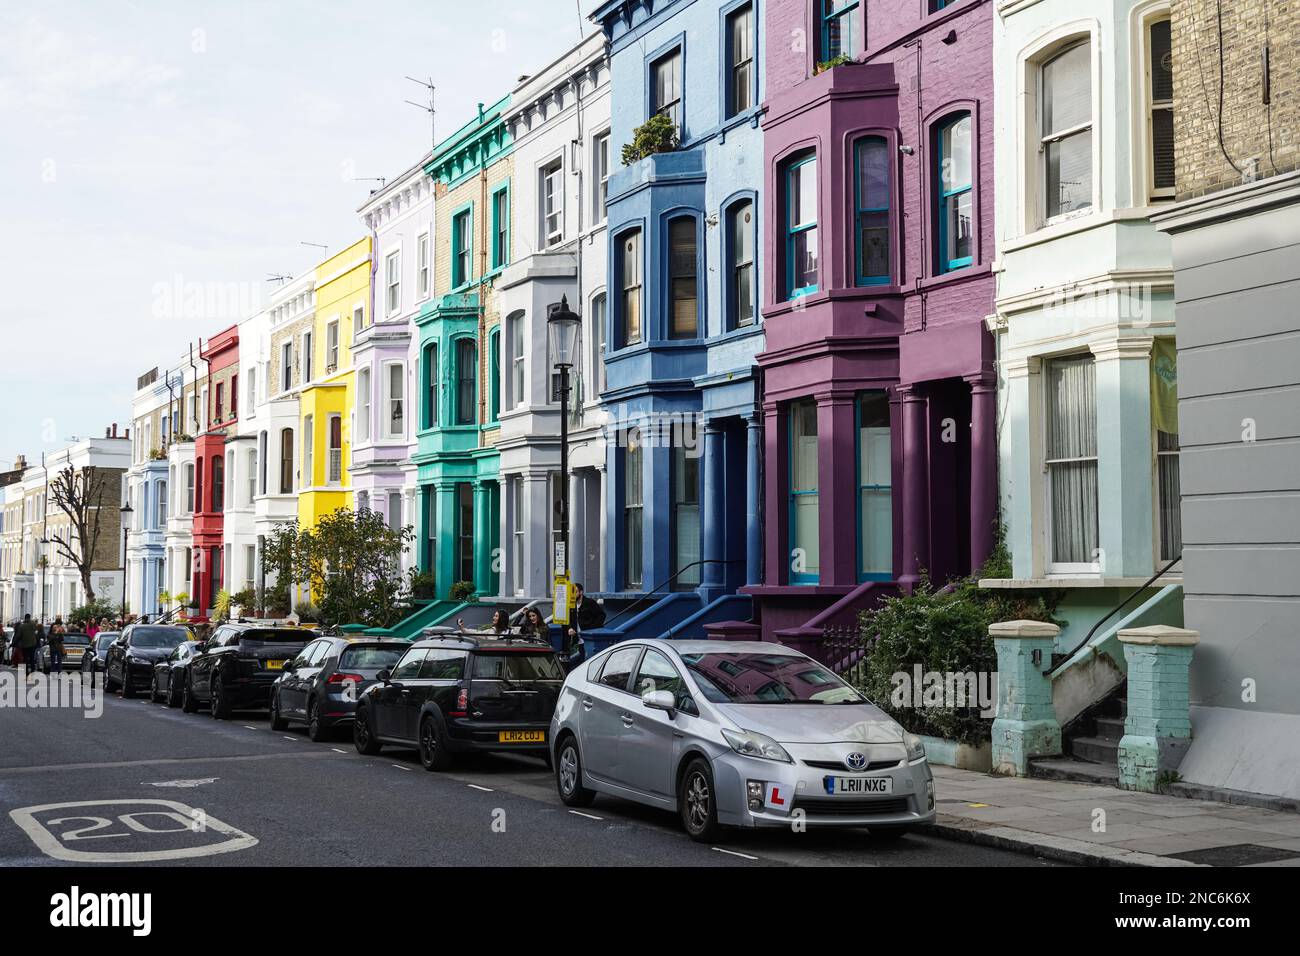 Colorful terrace houses on residential street in Notting Hill, London, England United Kingdom UK Stock Photo